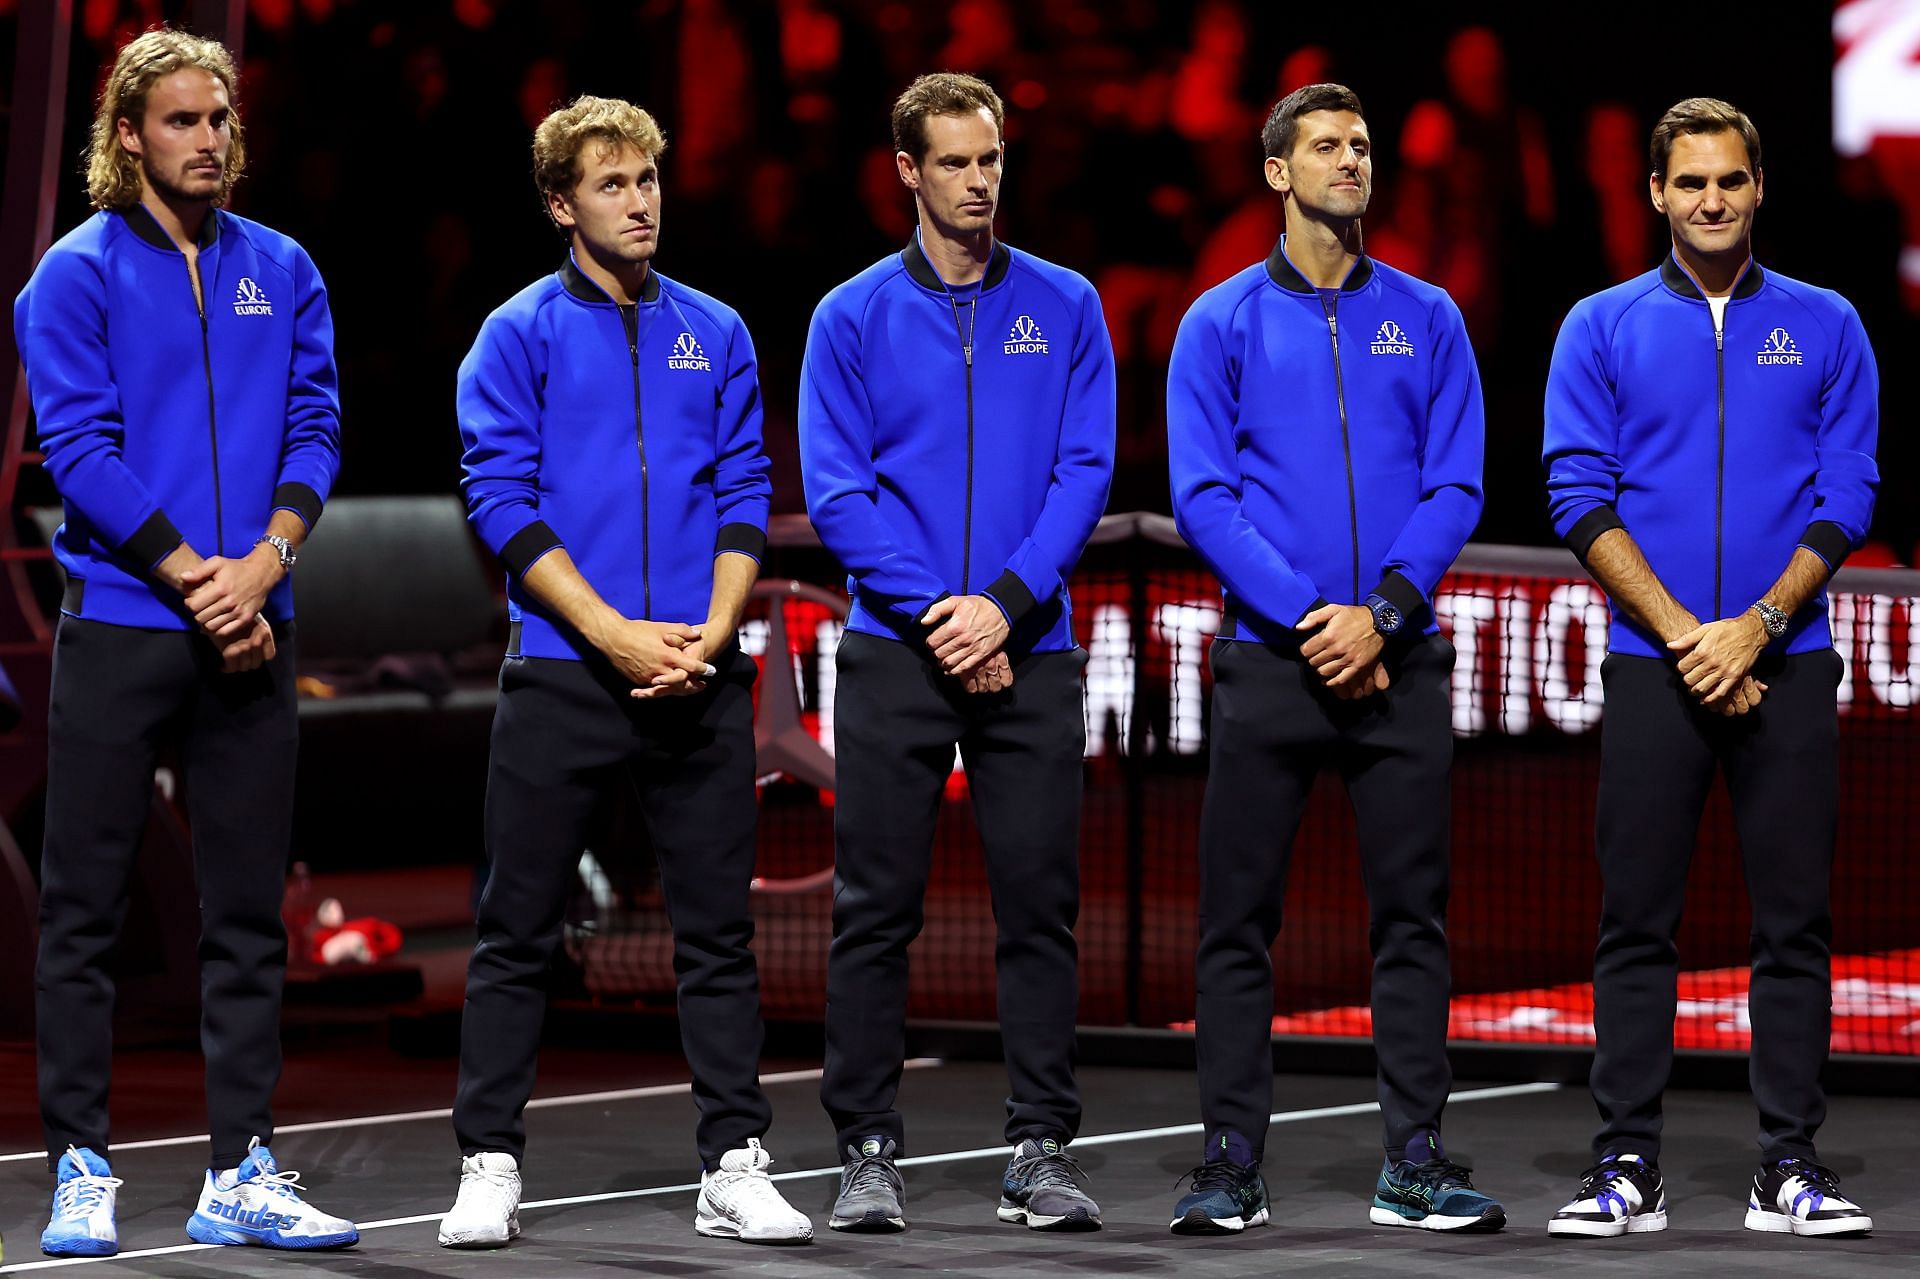 Team Europe at the Laver Cup 2022